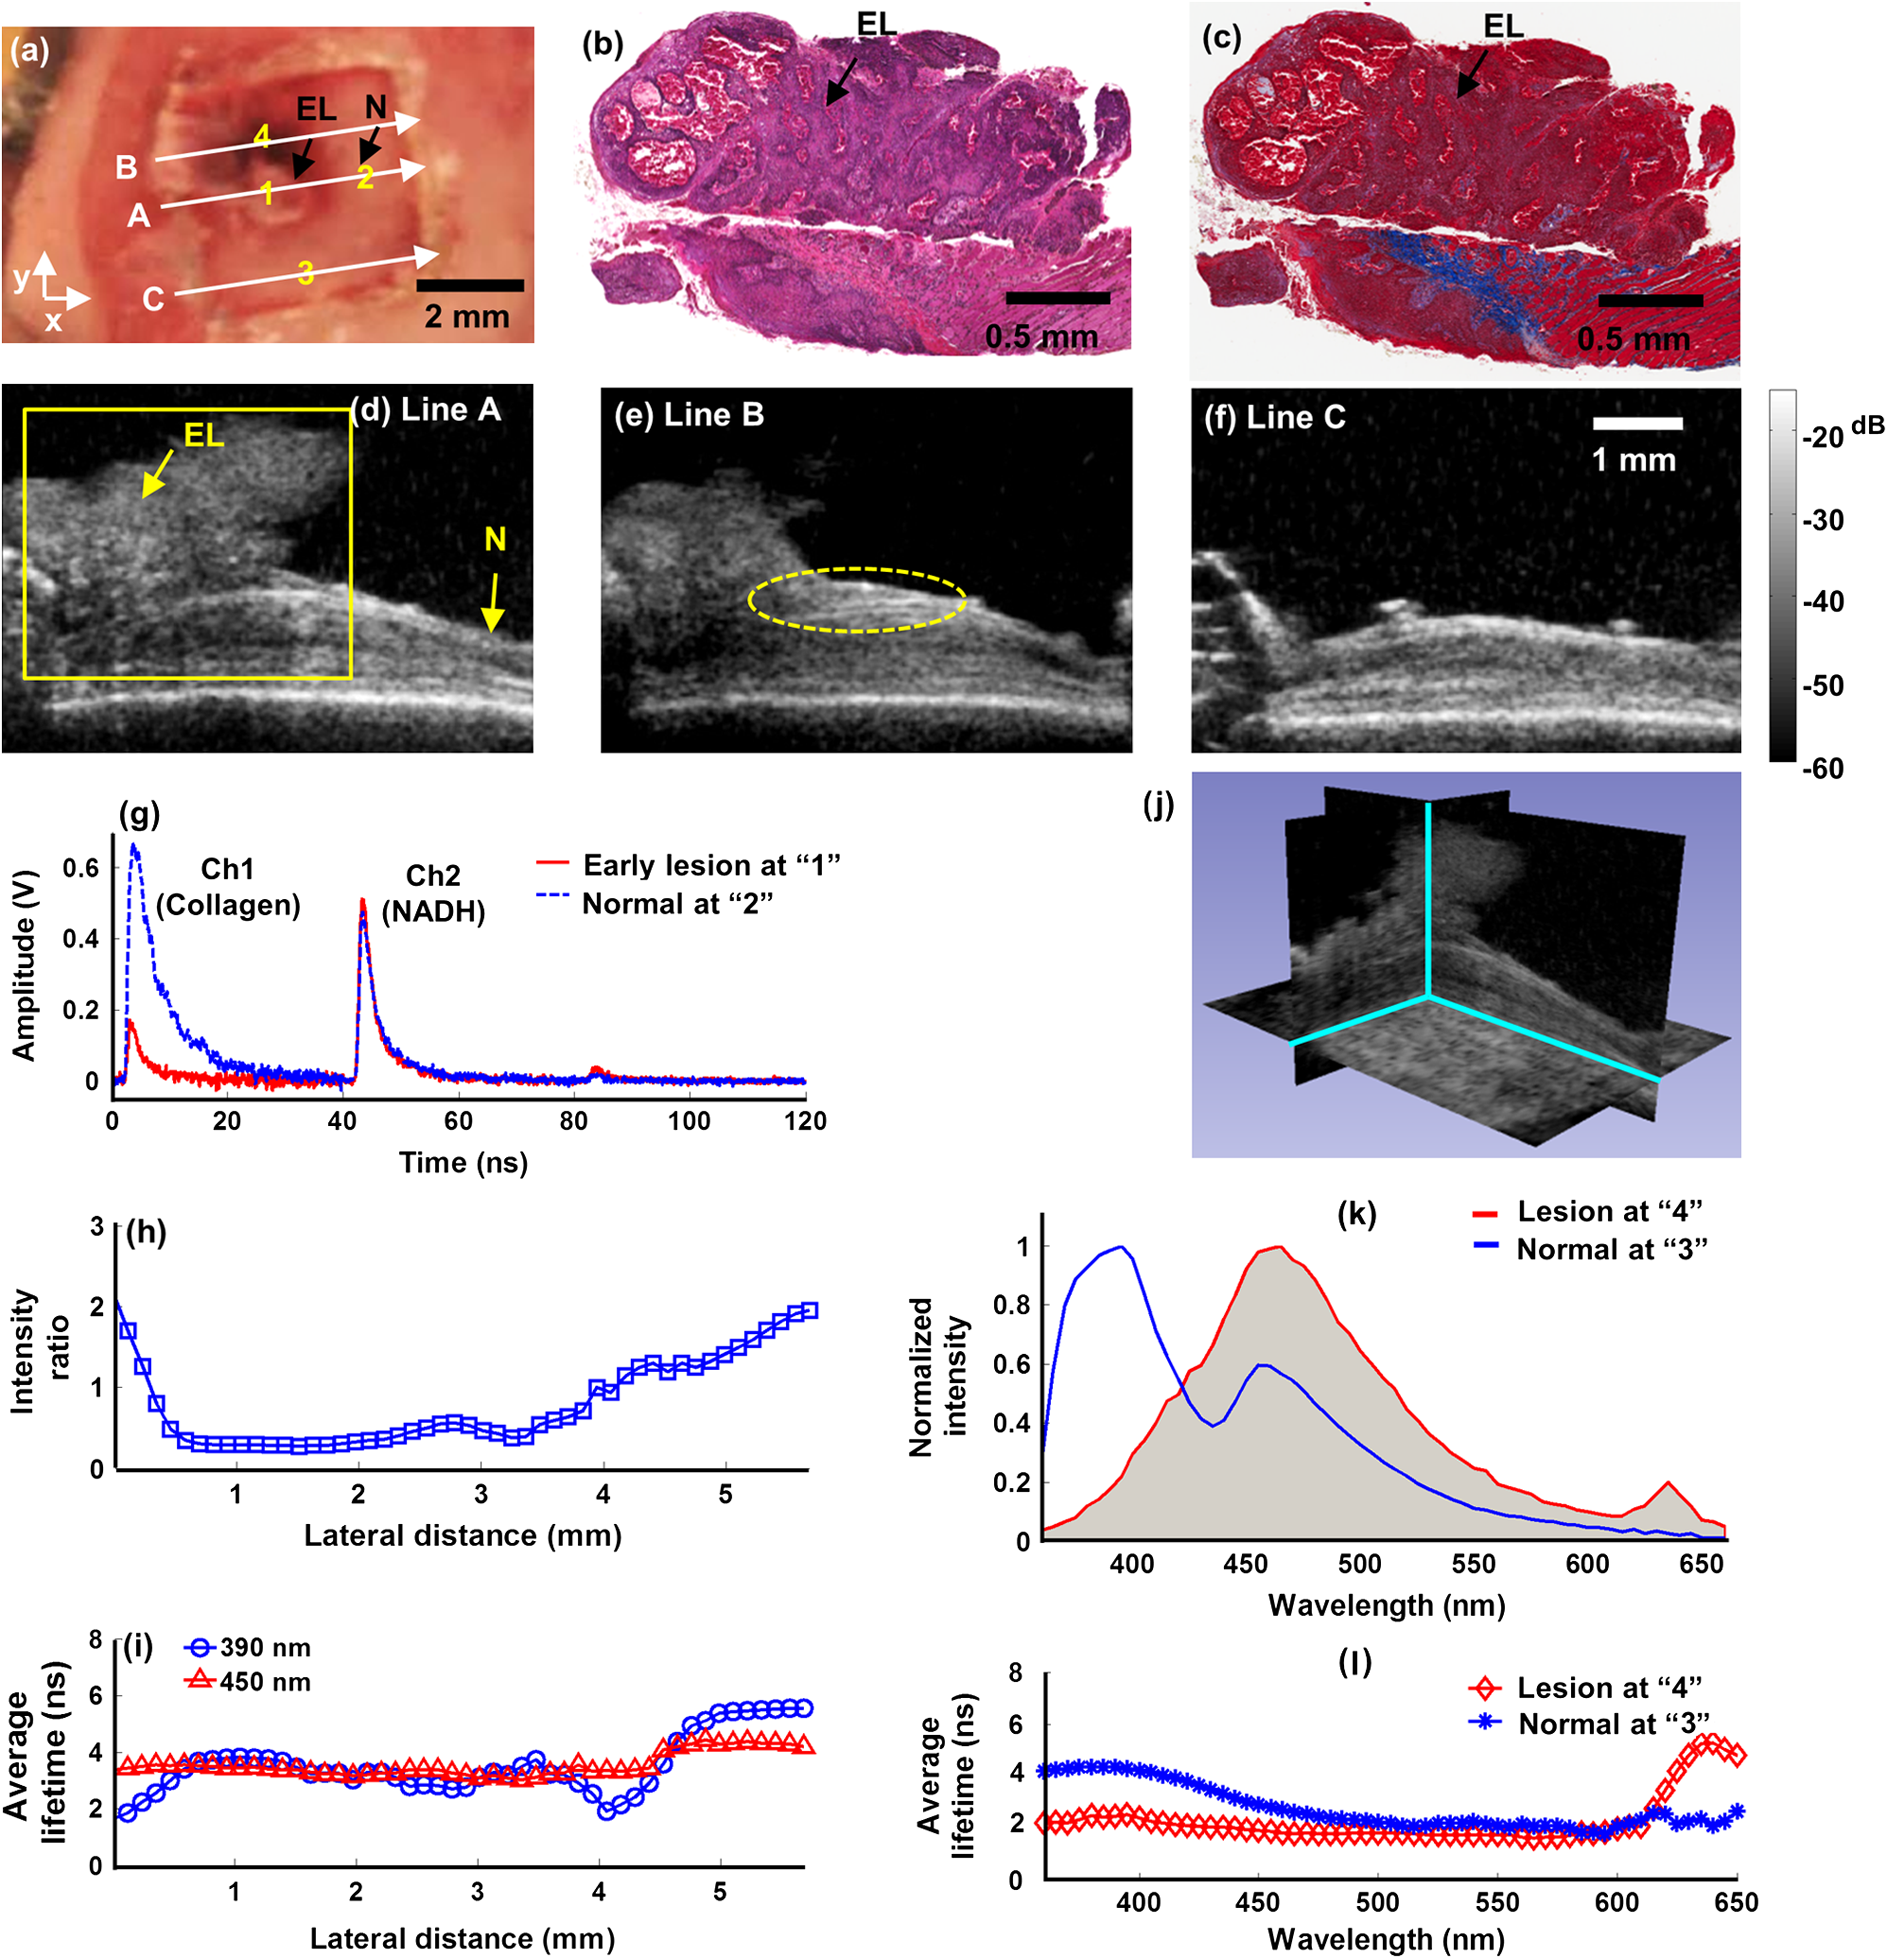 In-vivo validation imaging of a hamster cheek pouch: (A) fluorescence